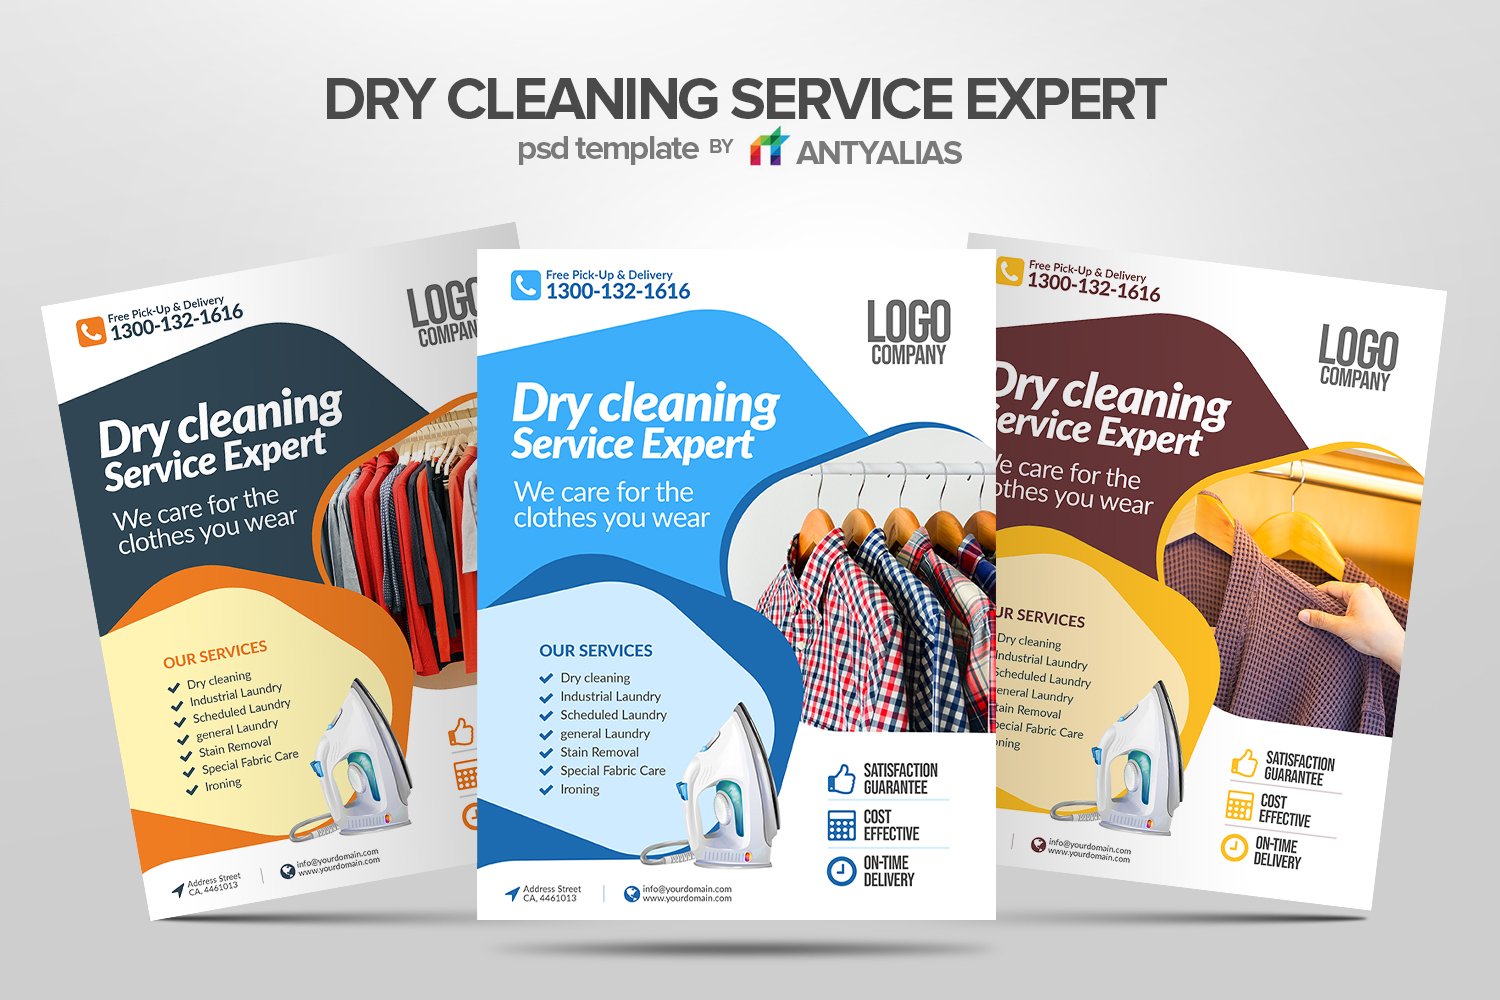 Dry Cleaning Service Expert Flyer cover image.